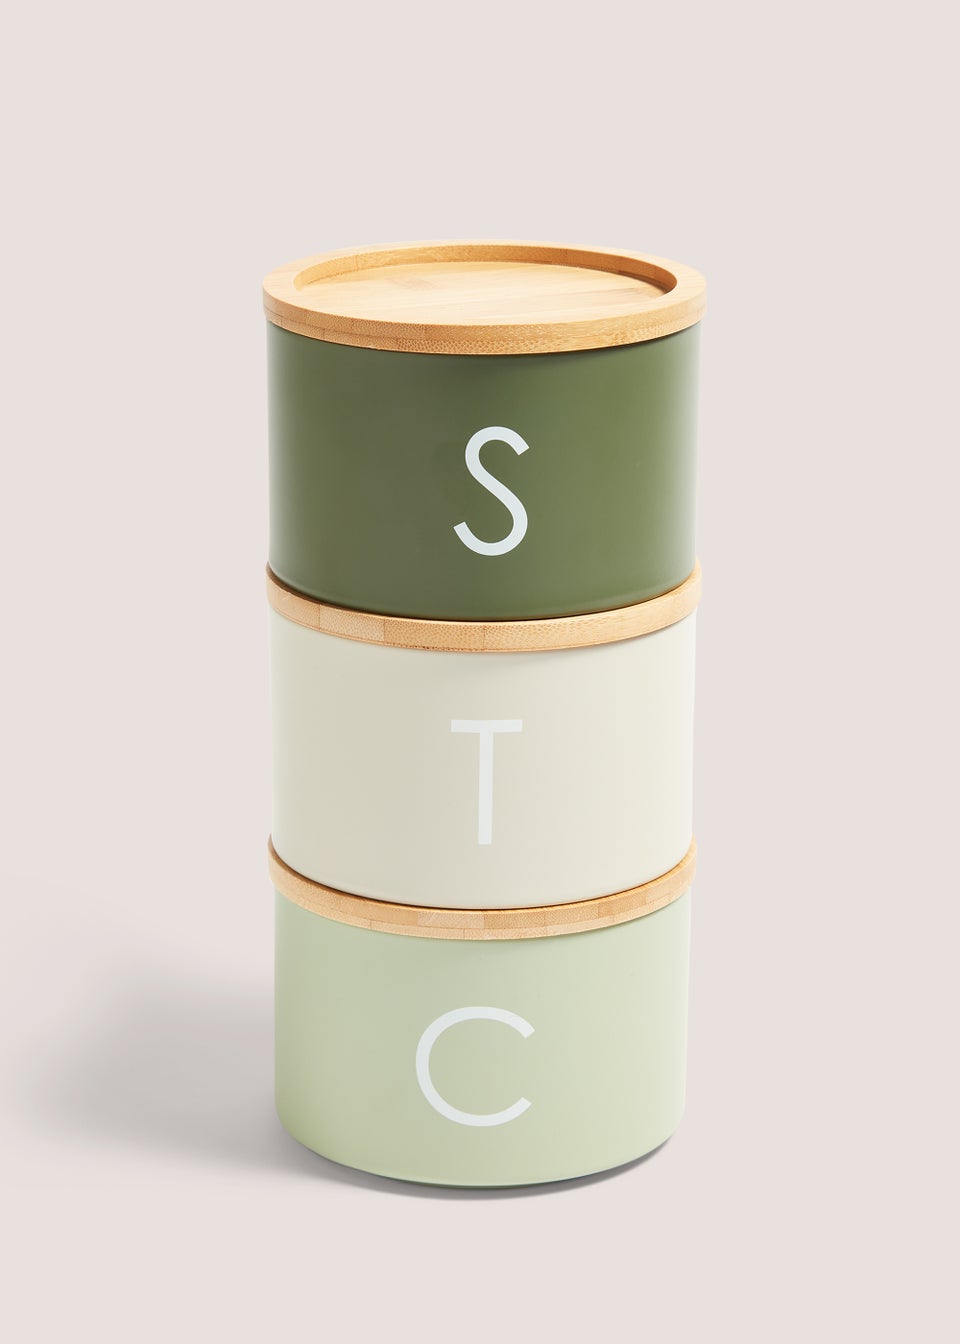 Green Metal Tea Coffee & Sugar Stackable Canisters (27cm x 13.5cm)